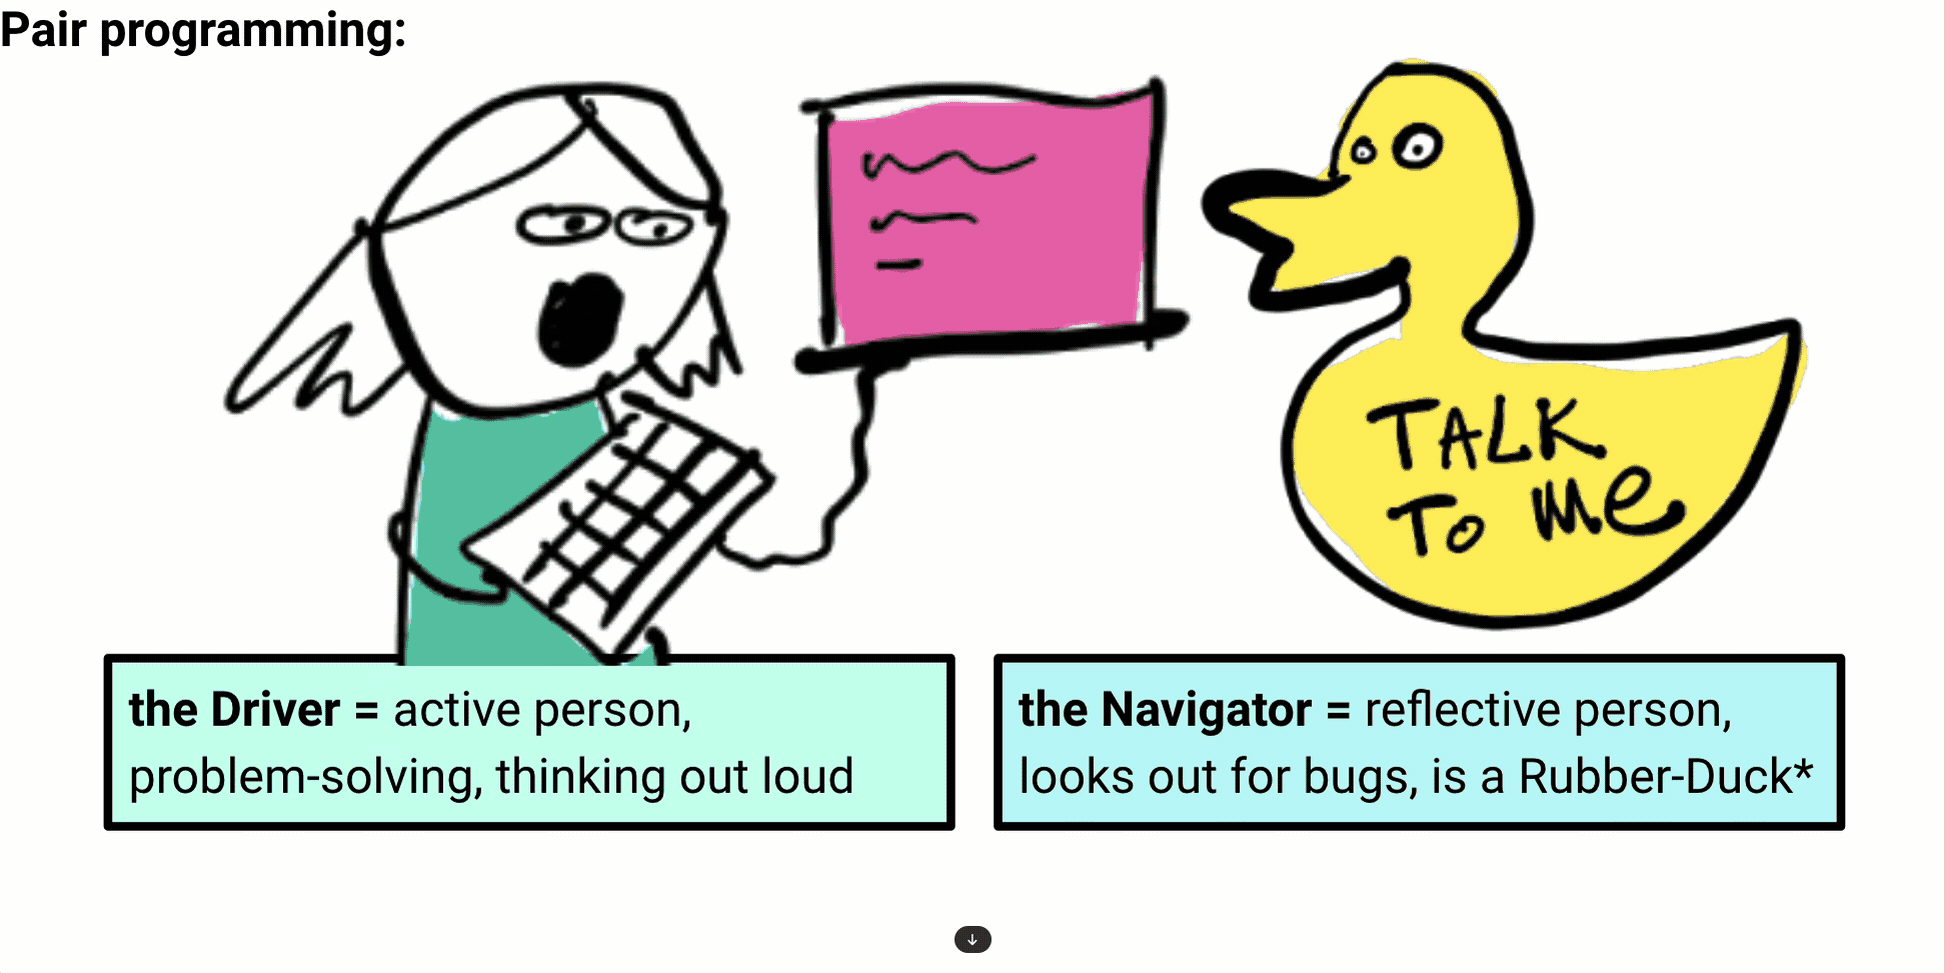 Roles in pair programming are the driver (active person, problem solving, thinking out loud) and navigator (reflective person, looks out for bugs, is a rubber duck). This animated image shows person holding a keyboard in front of a rubber duck, then duck becomes another person, then two people swap who's holding the keyboard.